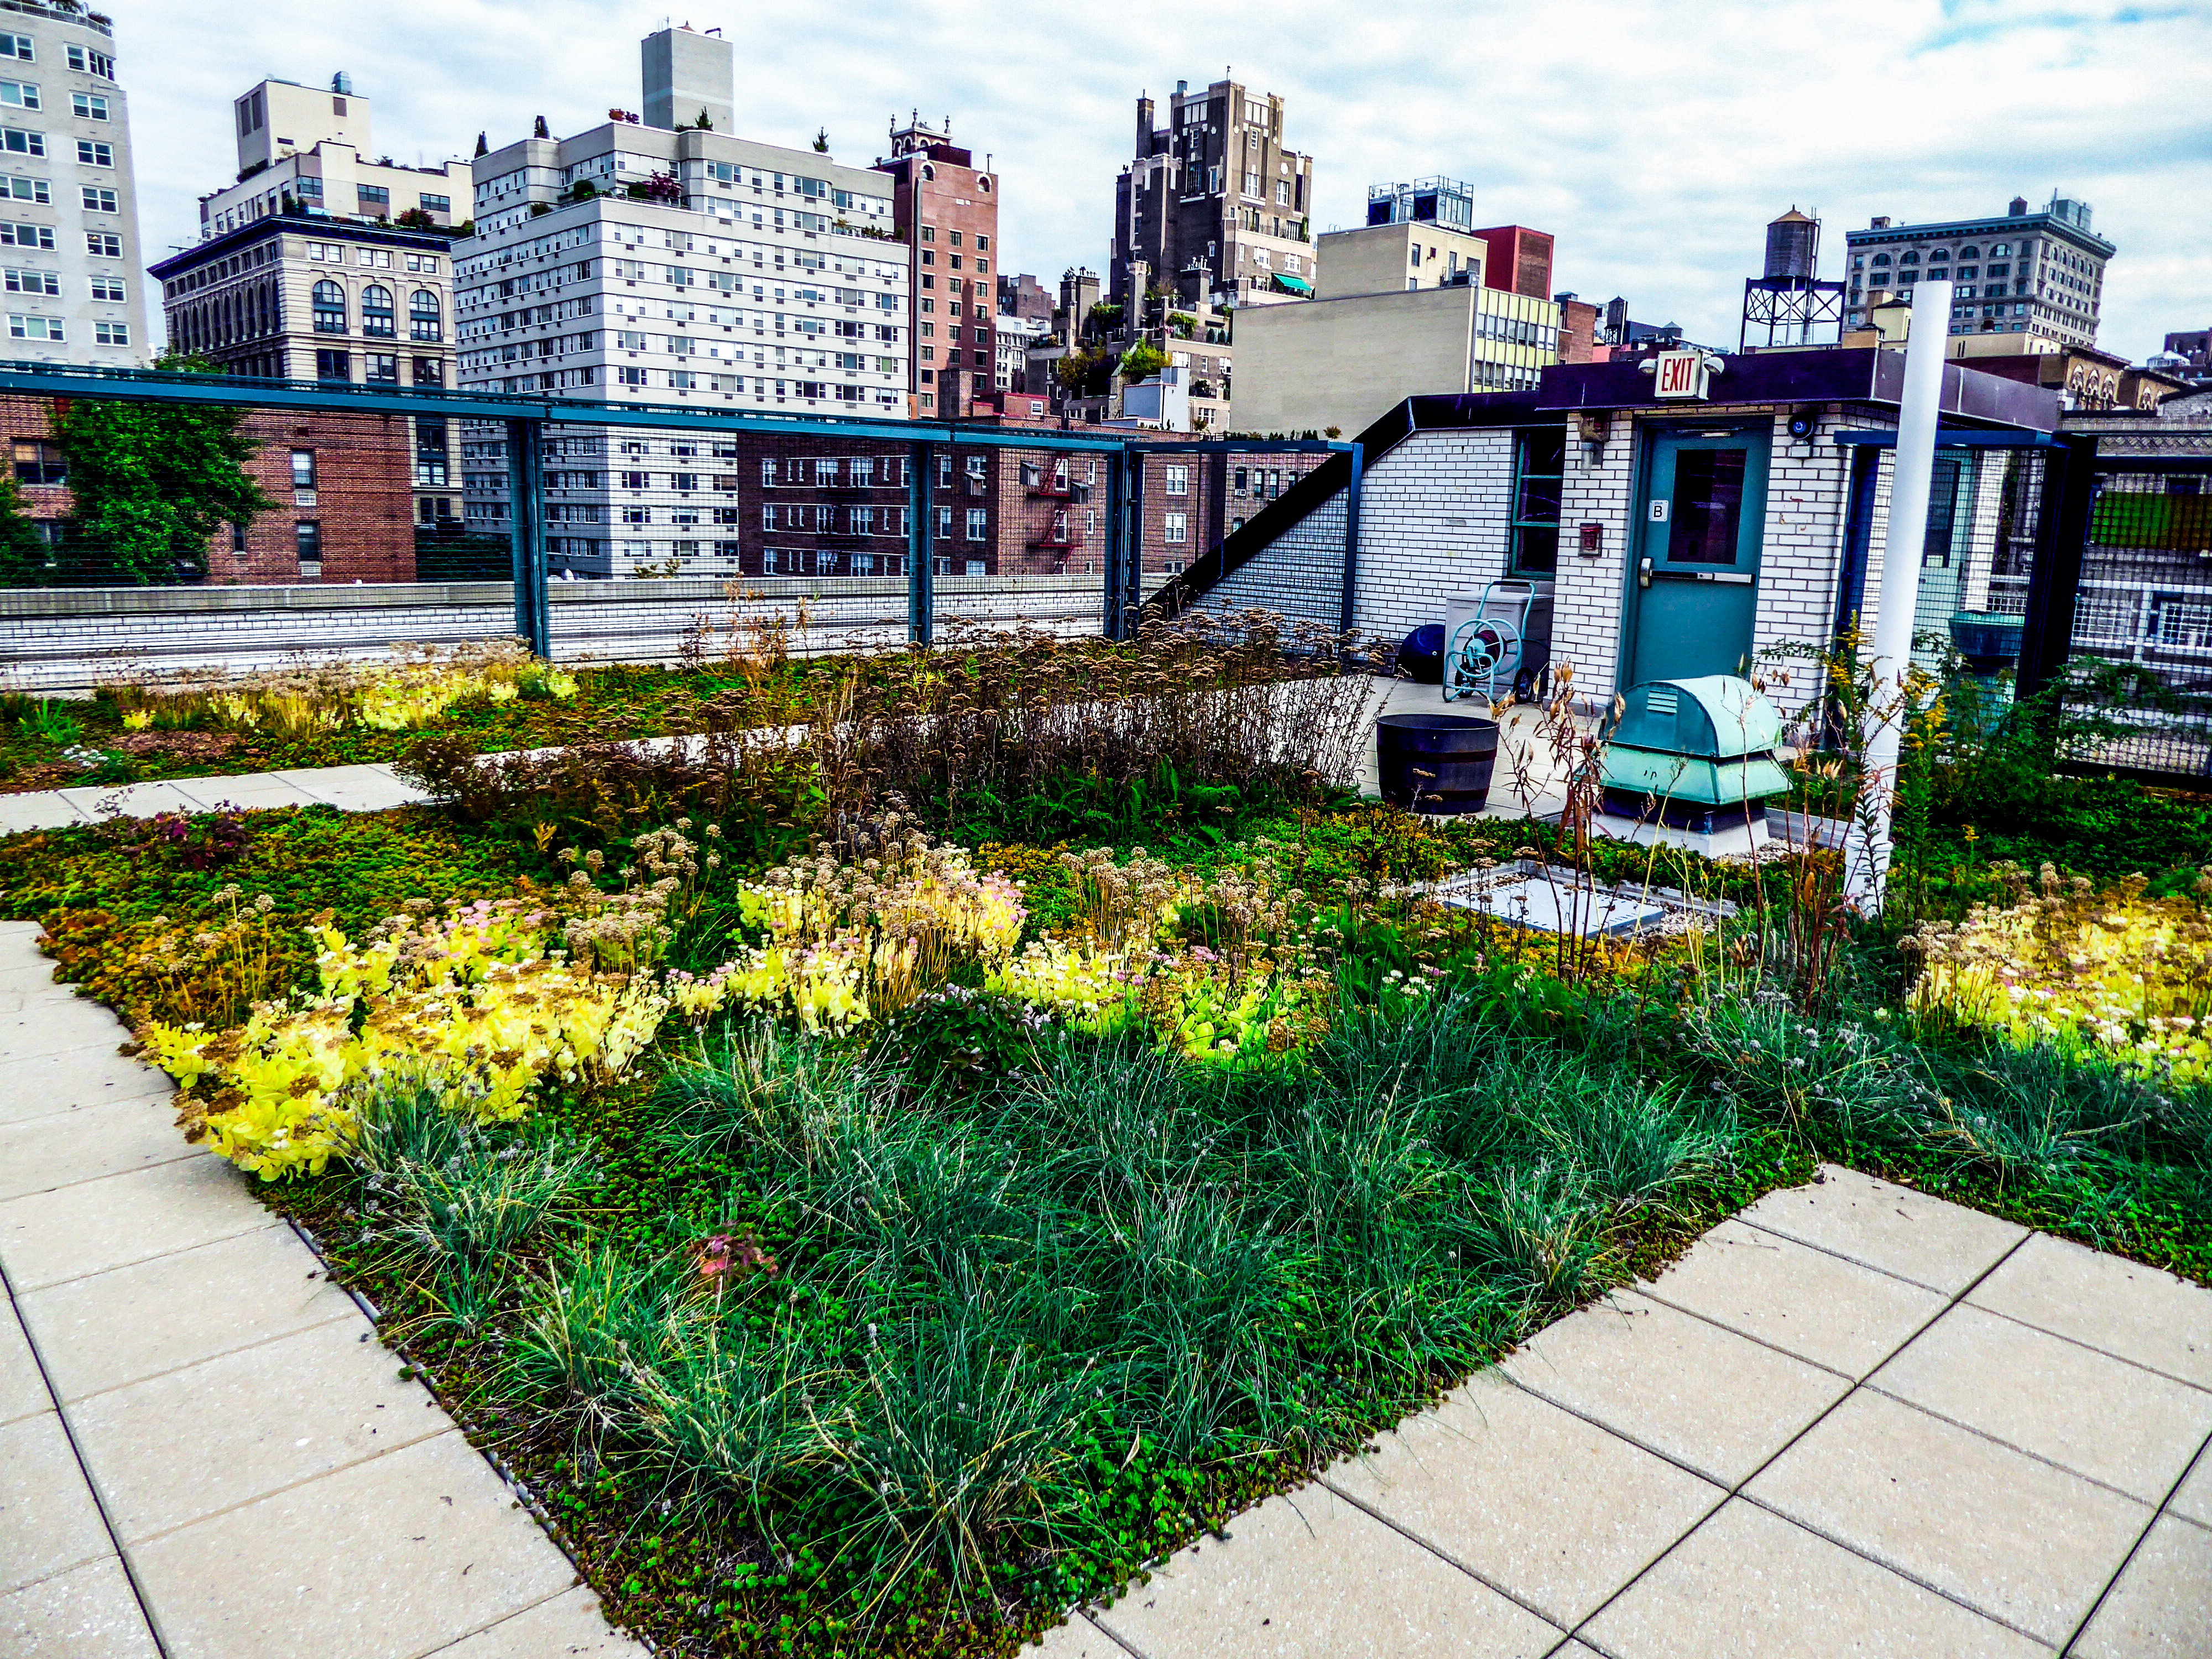 A view of a green roof in New York City.